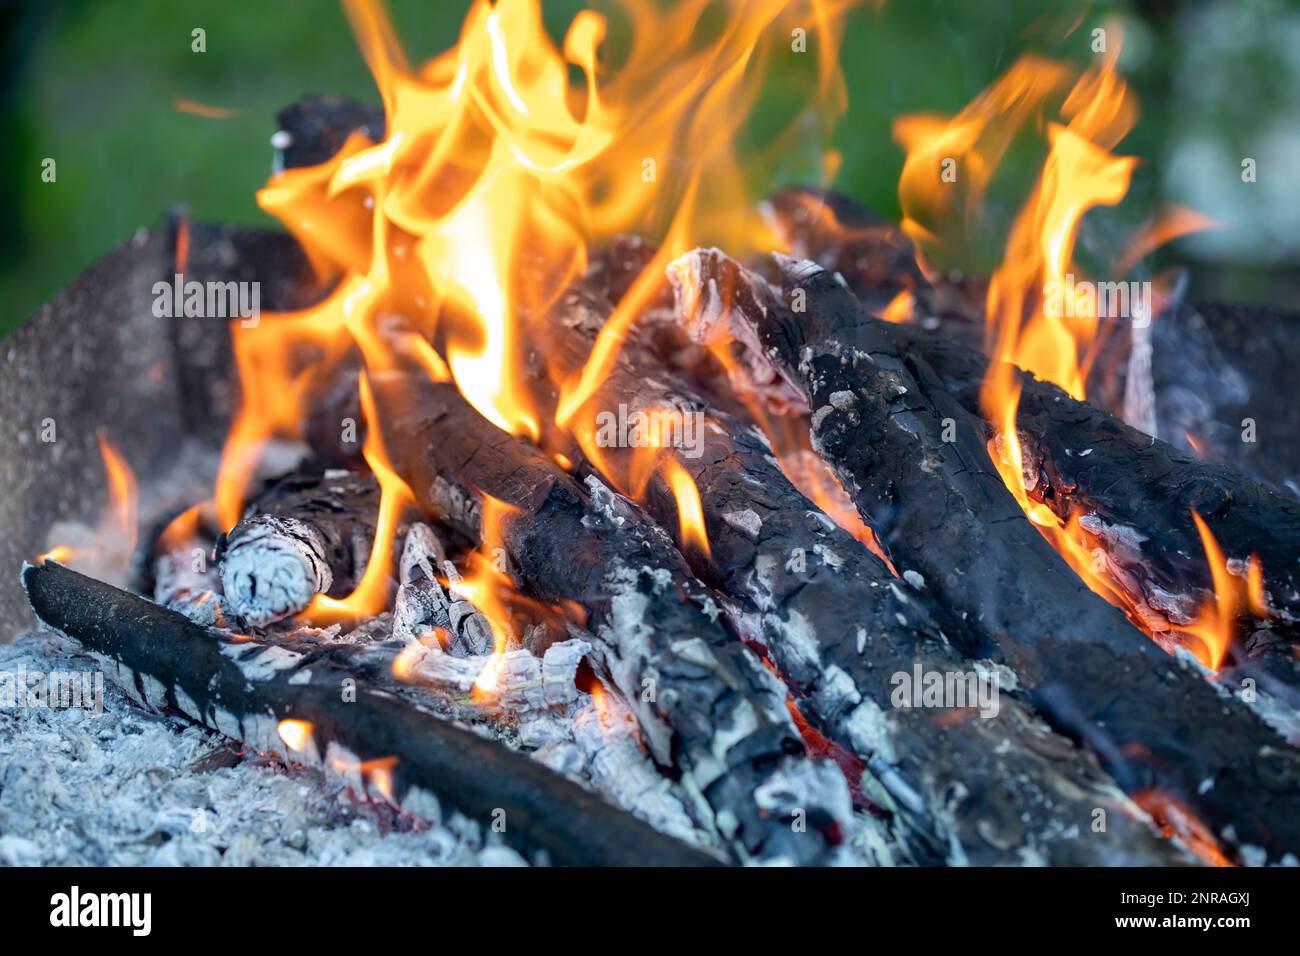 Bonfire in the evening.Wood burning, abstract flame  background Stock Photo